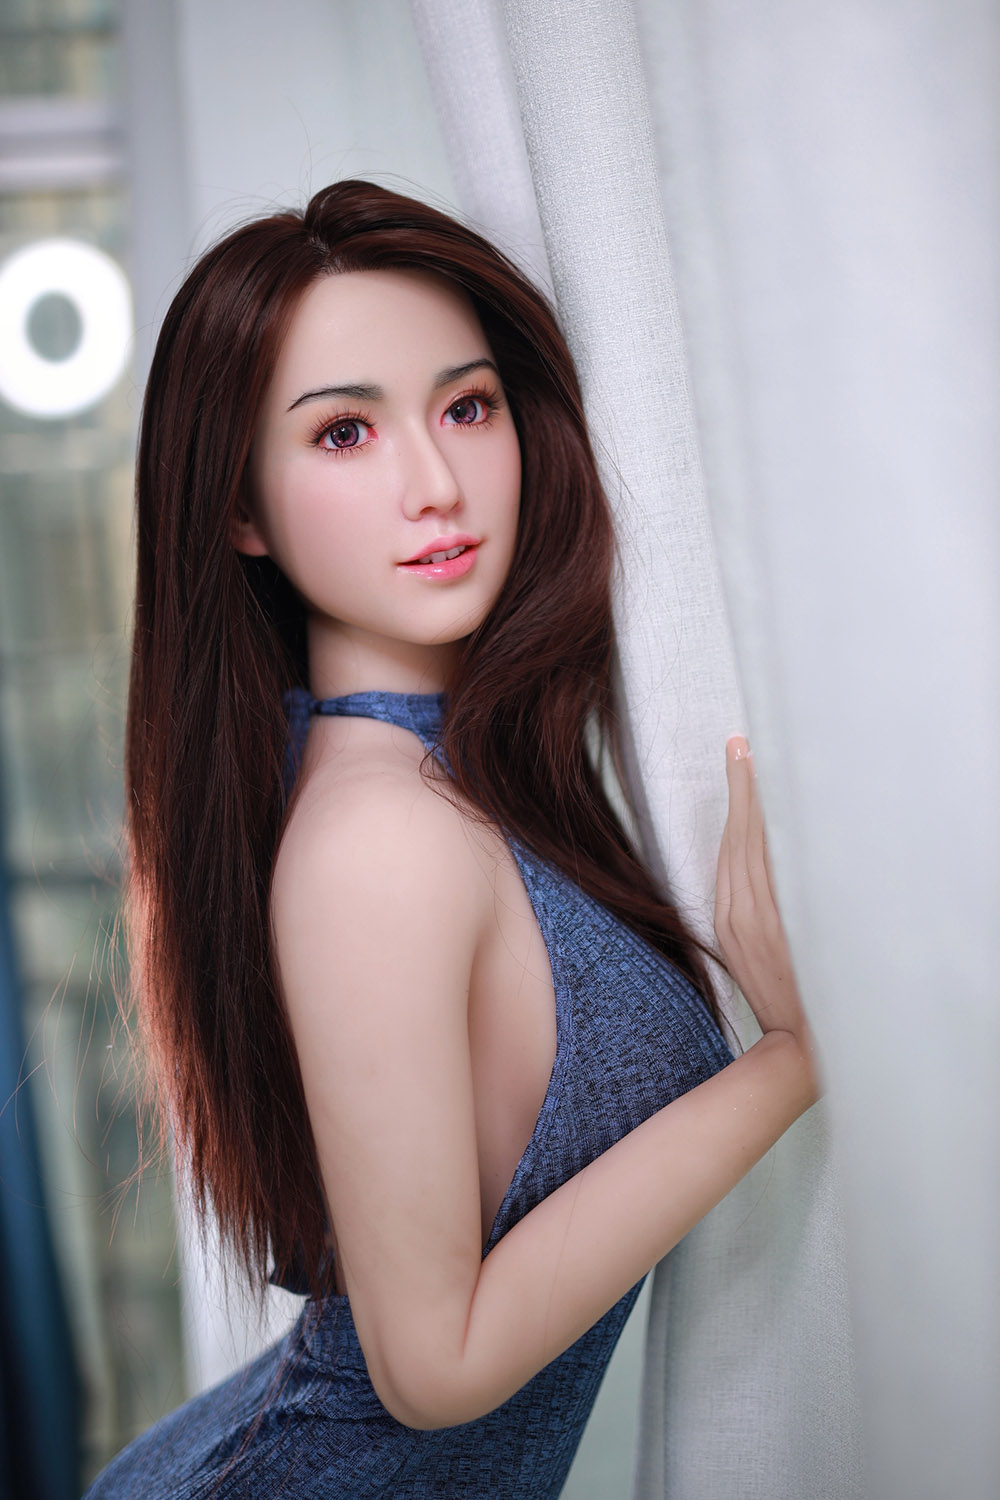 168cm 中国 美 熟女 エロ リアル ドール sex 名都希（なつき）